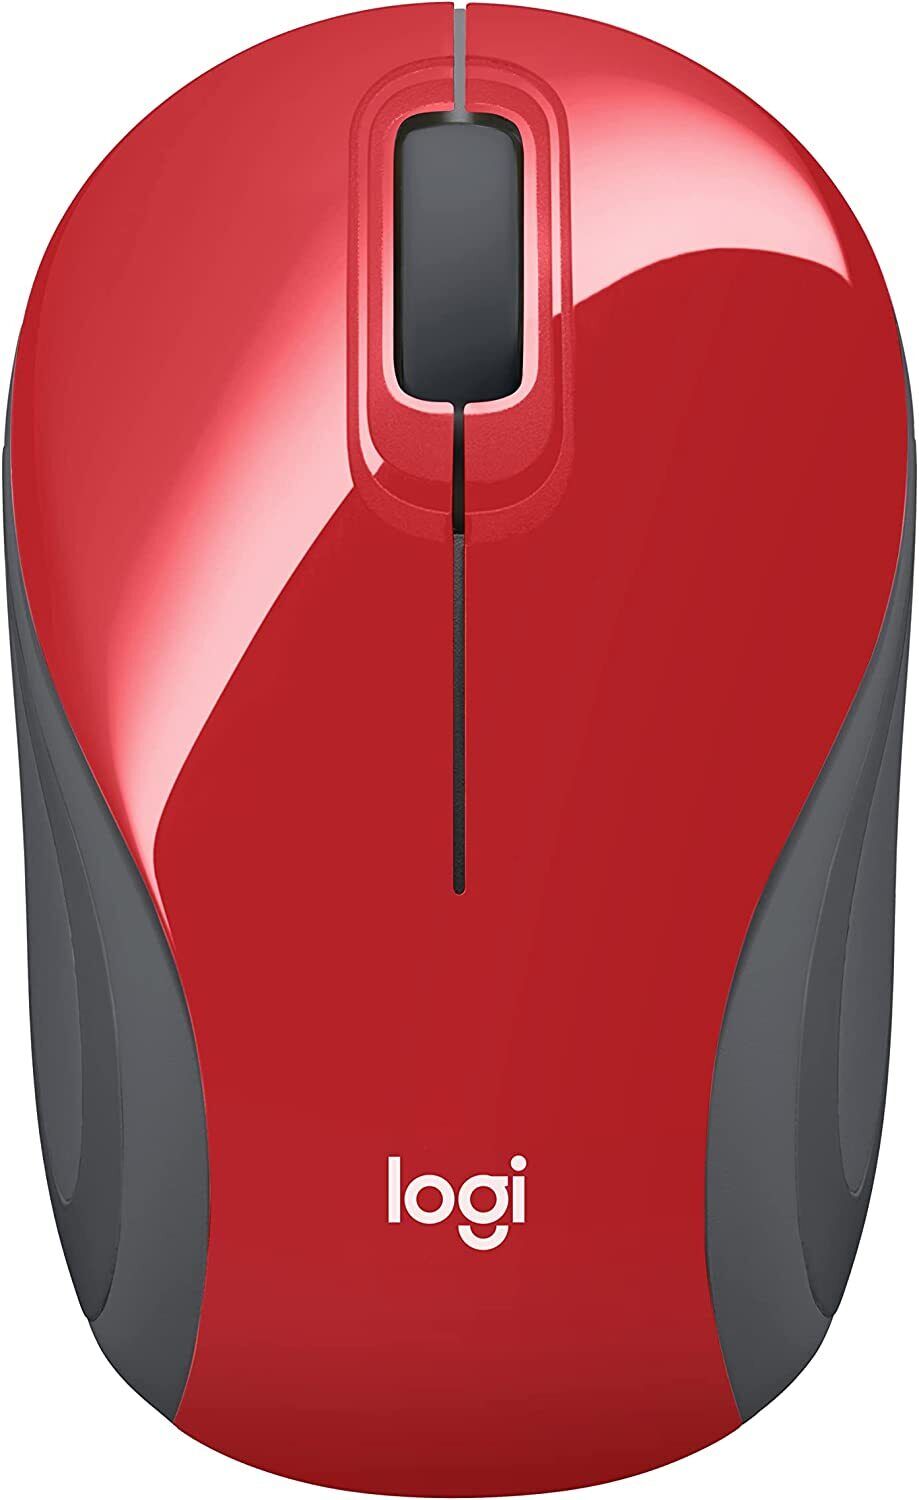 5x Brand New Logitech M187 Wireless Ultral Mini Optical Mouse, Red, 910-004838